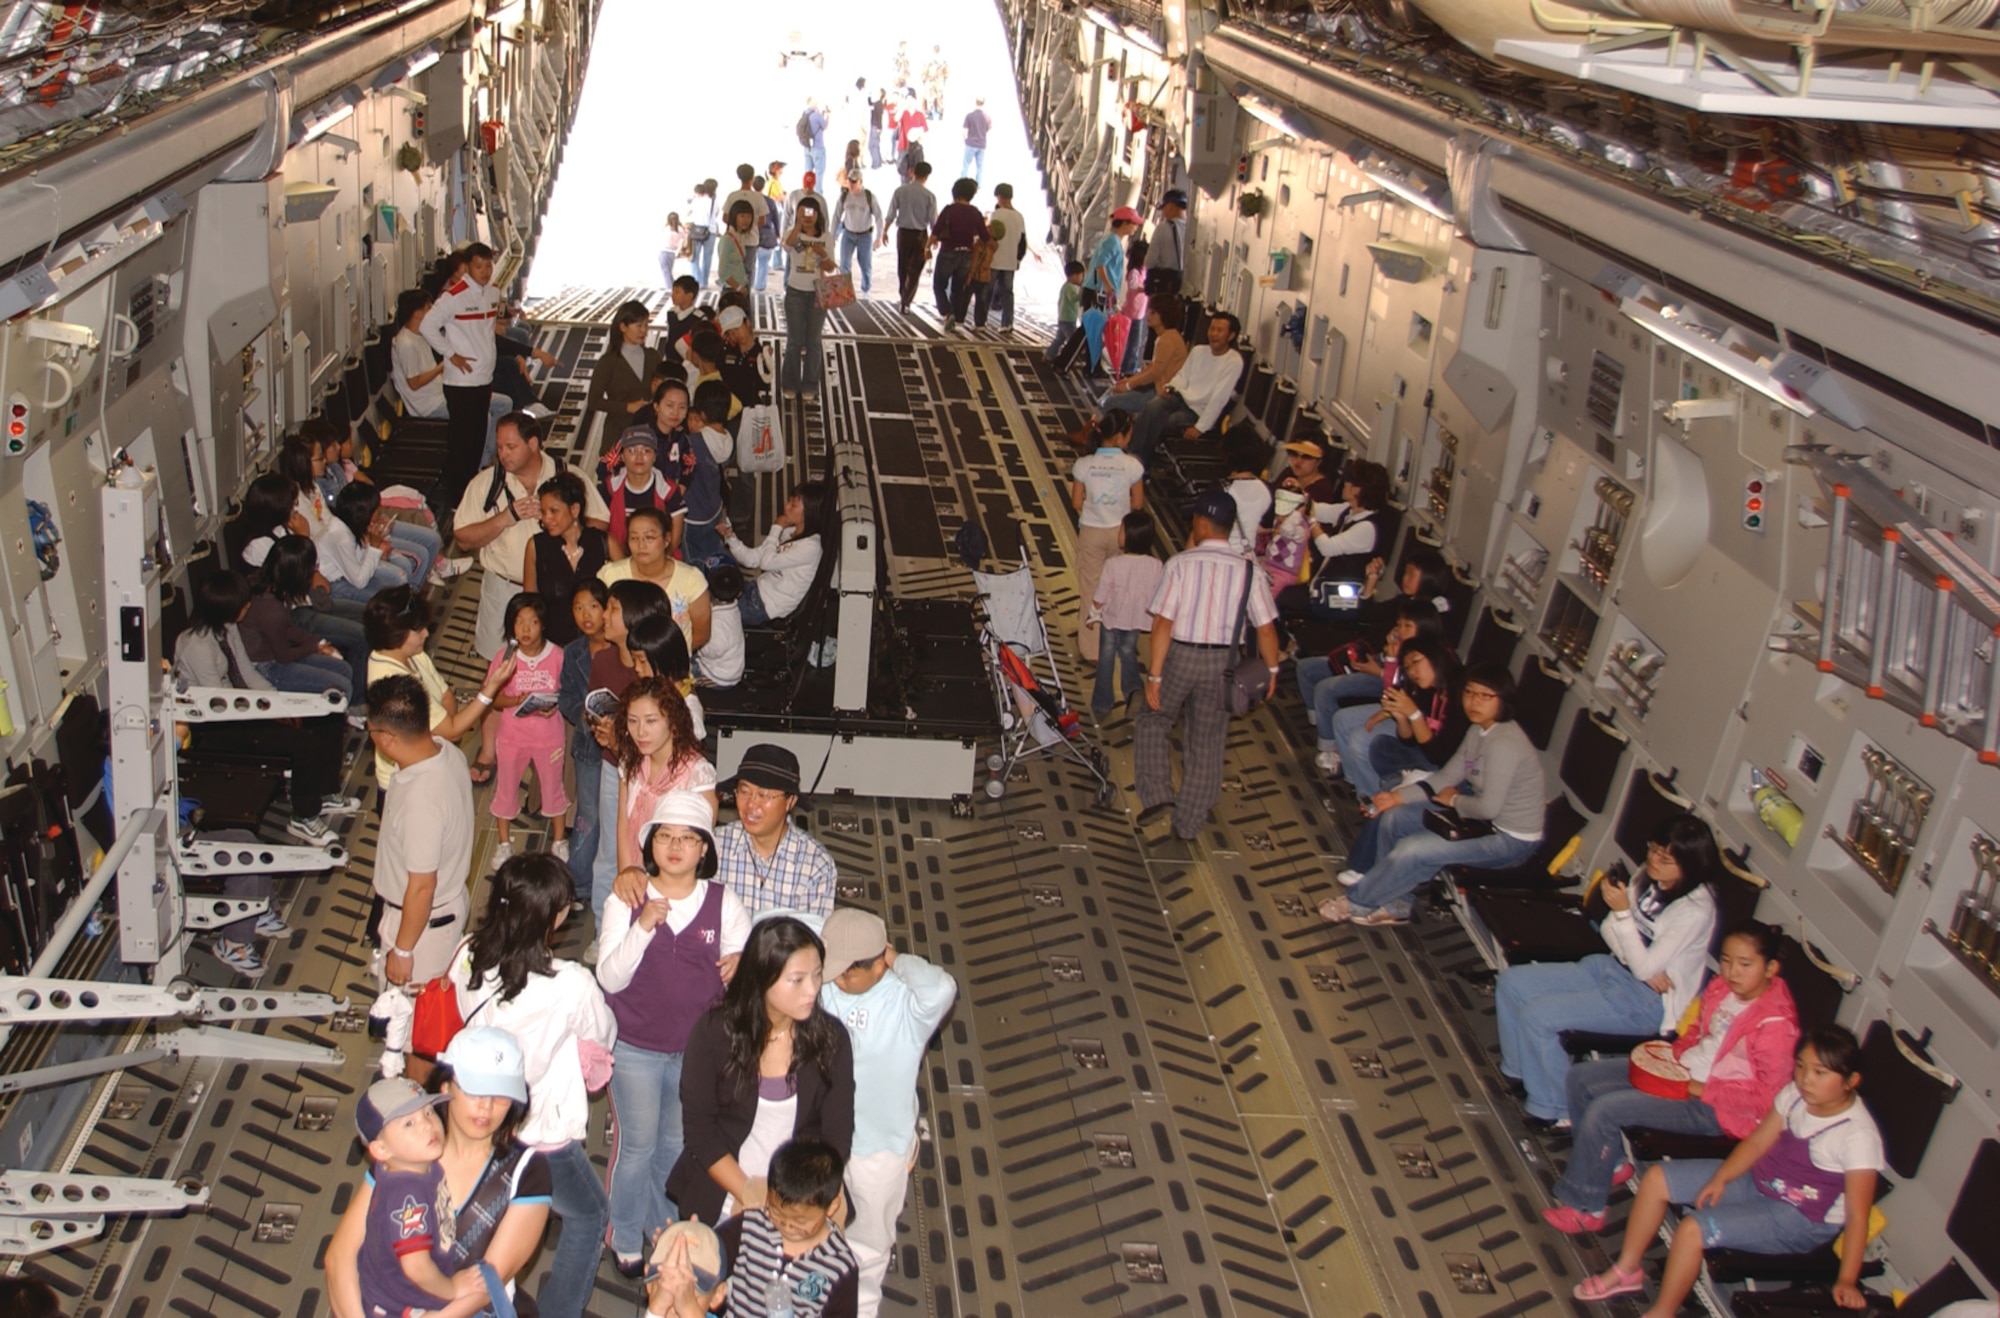 OSAN AIR BASE, Republic of Korea --  Visitors look at the cargo area of a C-17 during the 2006 Air Power Day air show here. Many of the larger planes and helicopters were opened for people to look and walk around inside. (U.S. Air Force photo by Airman Jason Epley)